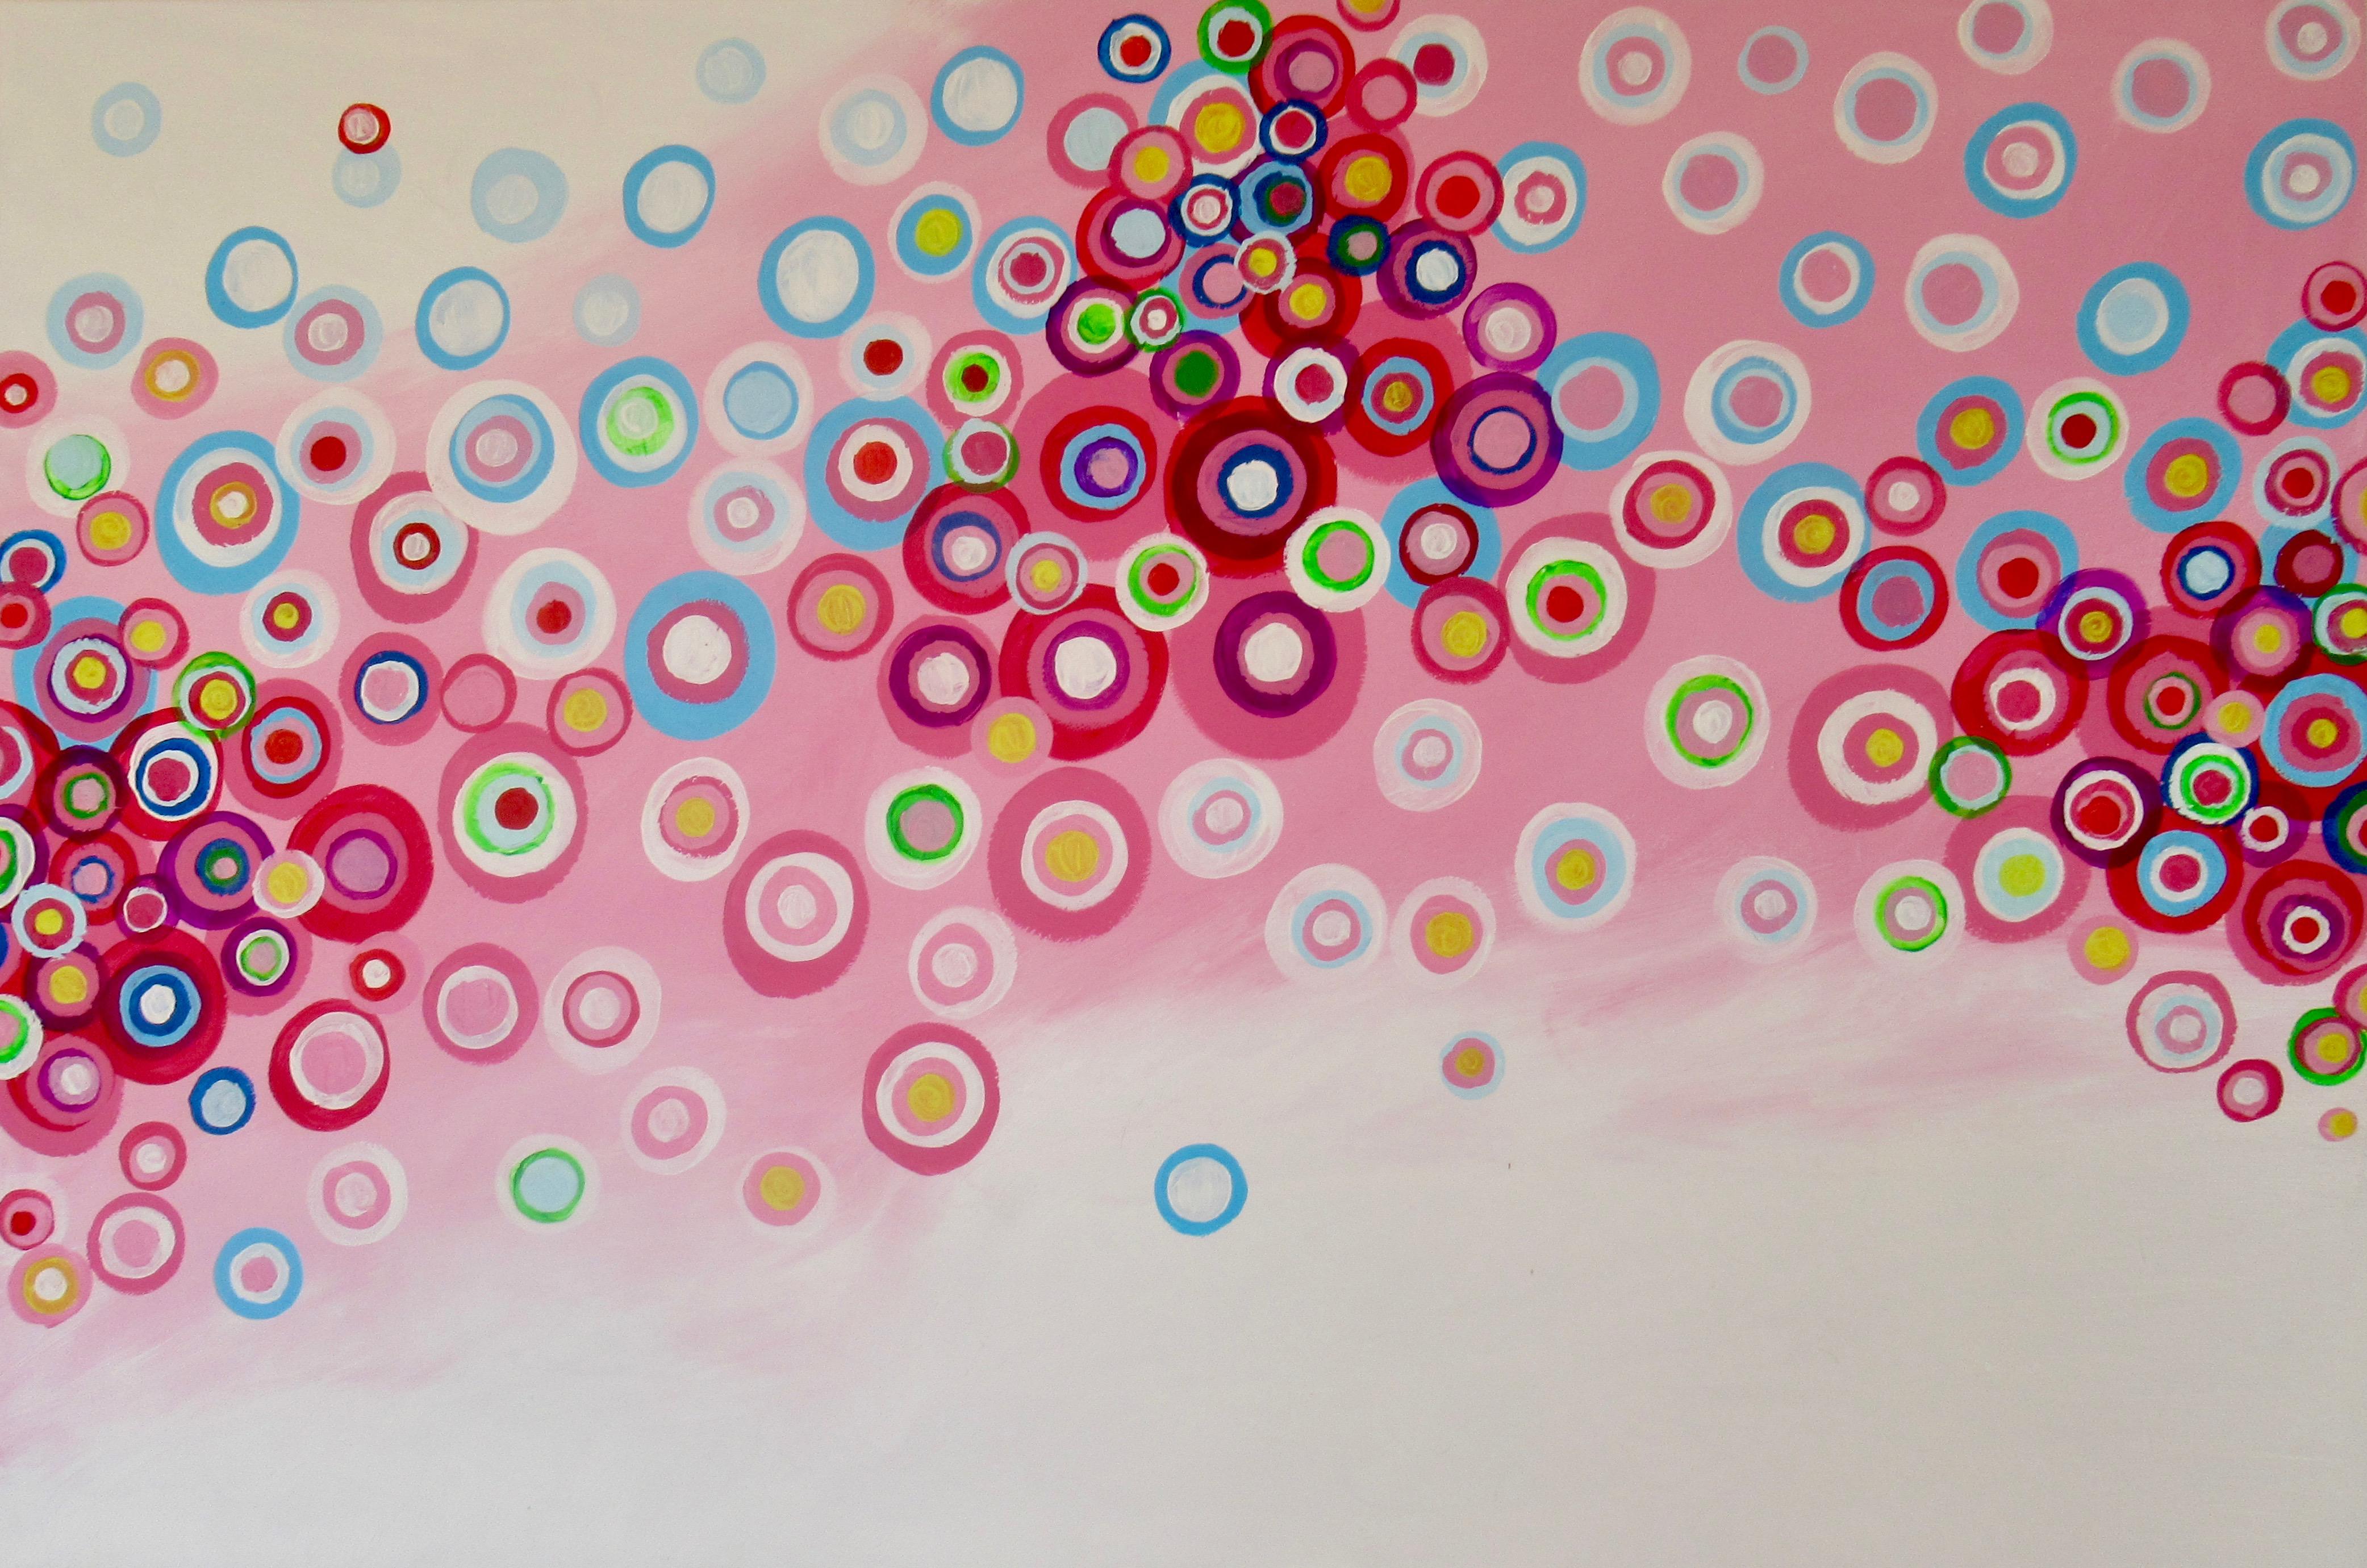 <p>Artist Comments<br />Artist Natasha Tayles envisions the high notes of a musical instrument in this joyful piece. Pink, blue, white, and green circles drift merrily on an invisible staff, creating a symphonic visual expression against a gradient